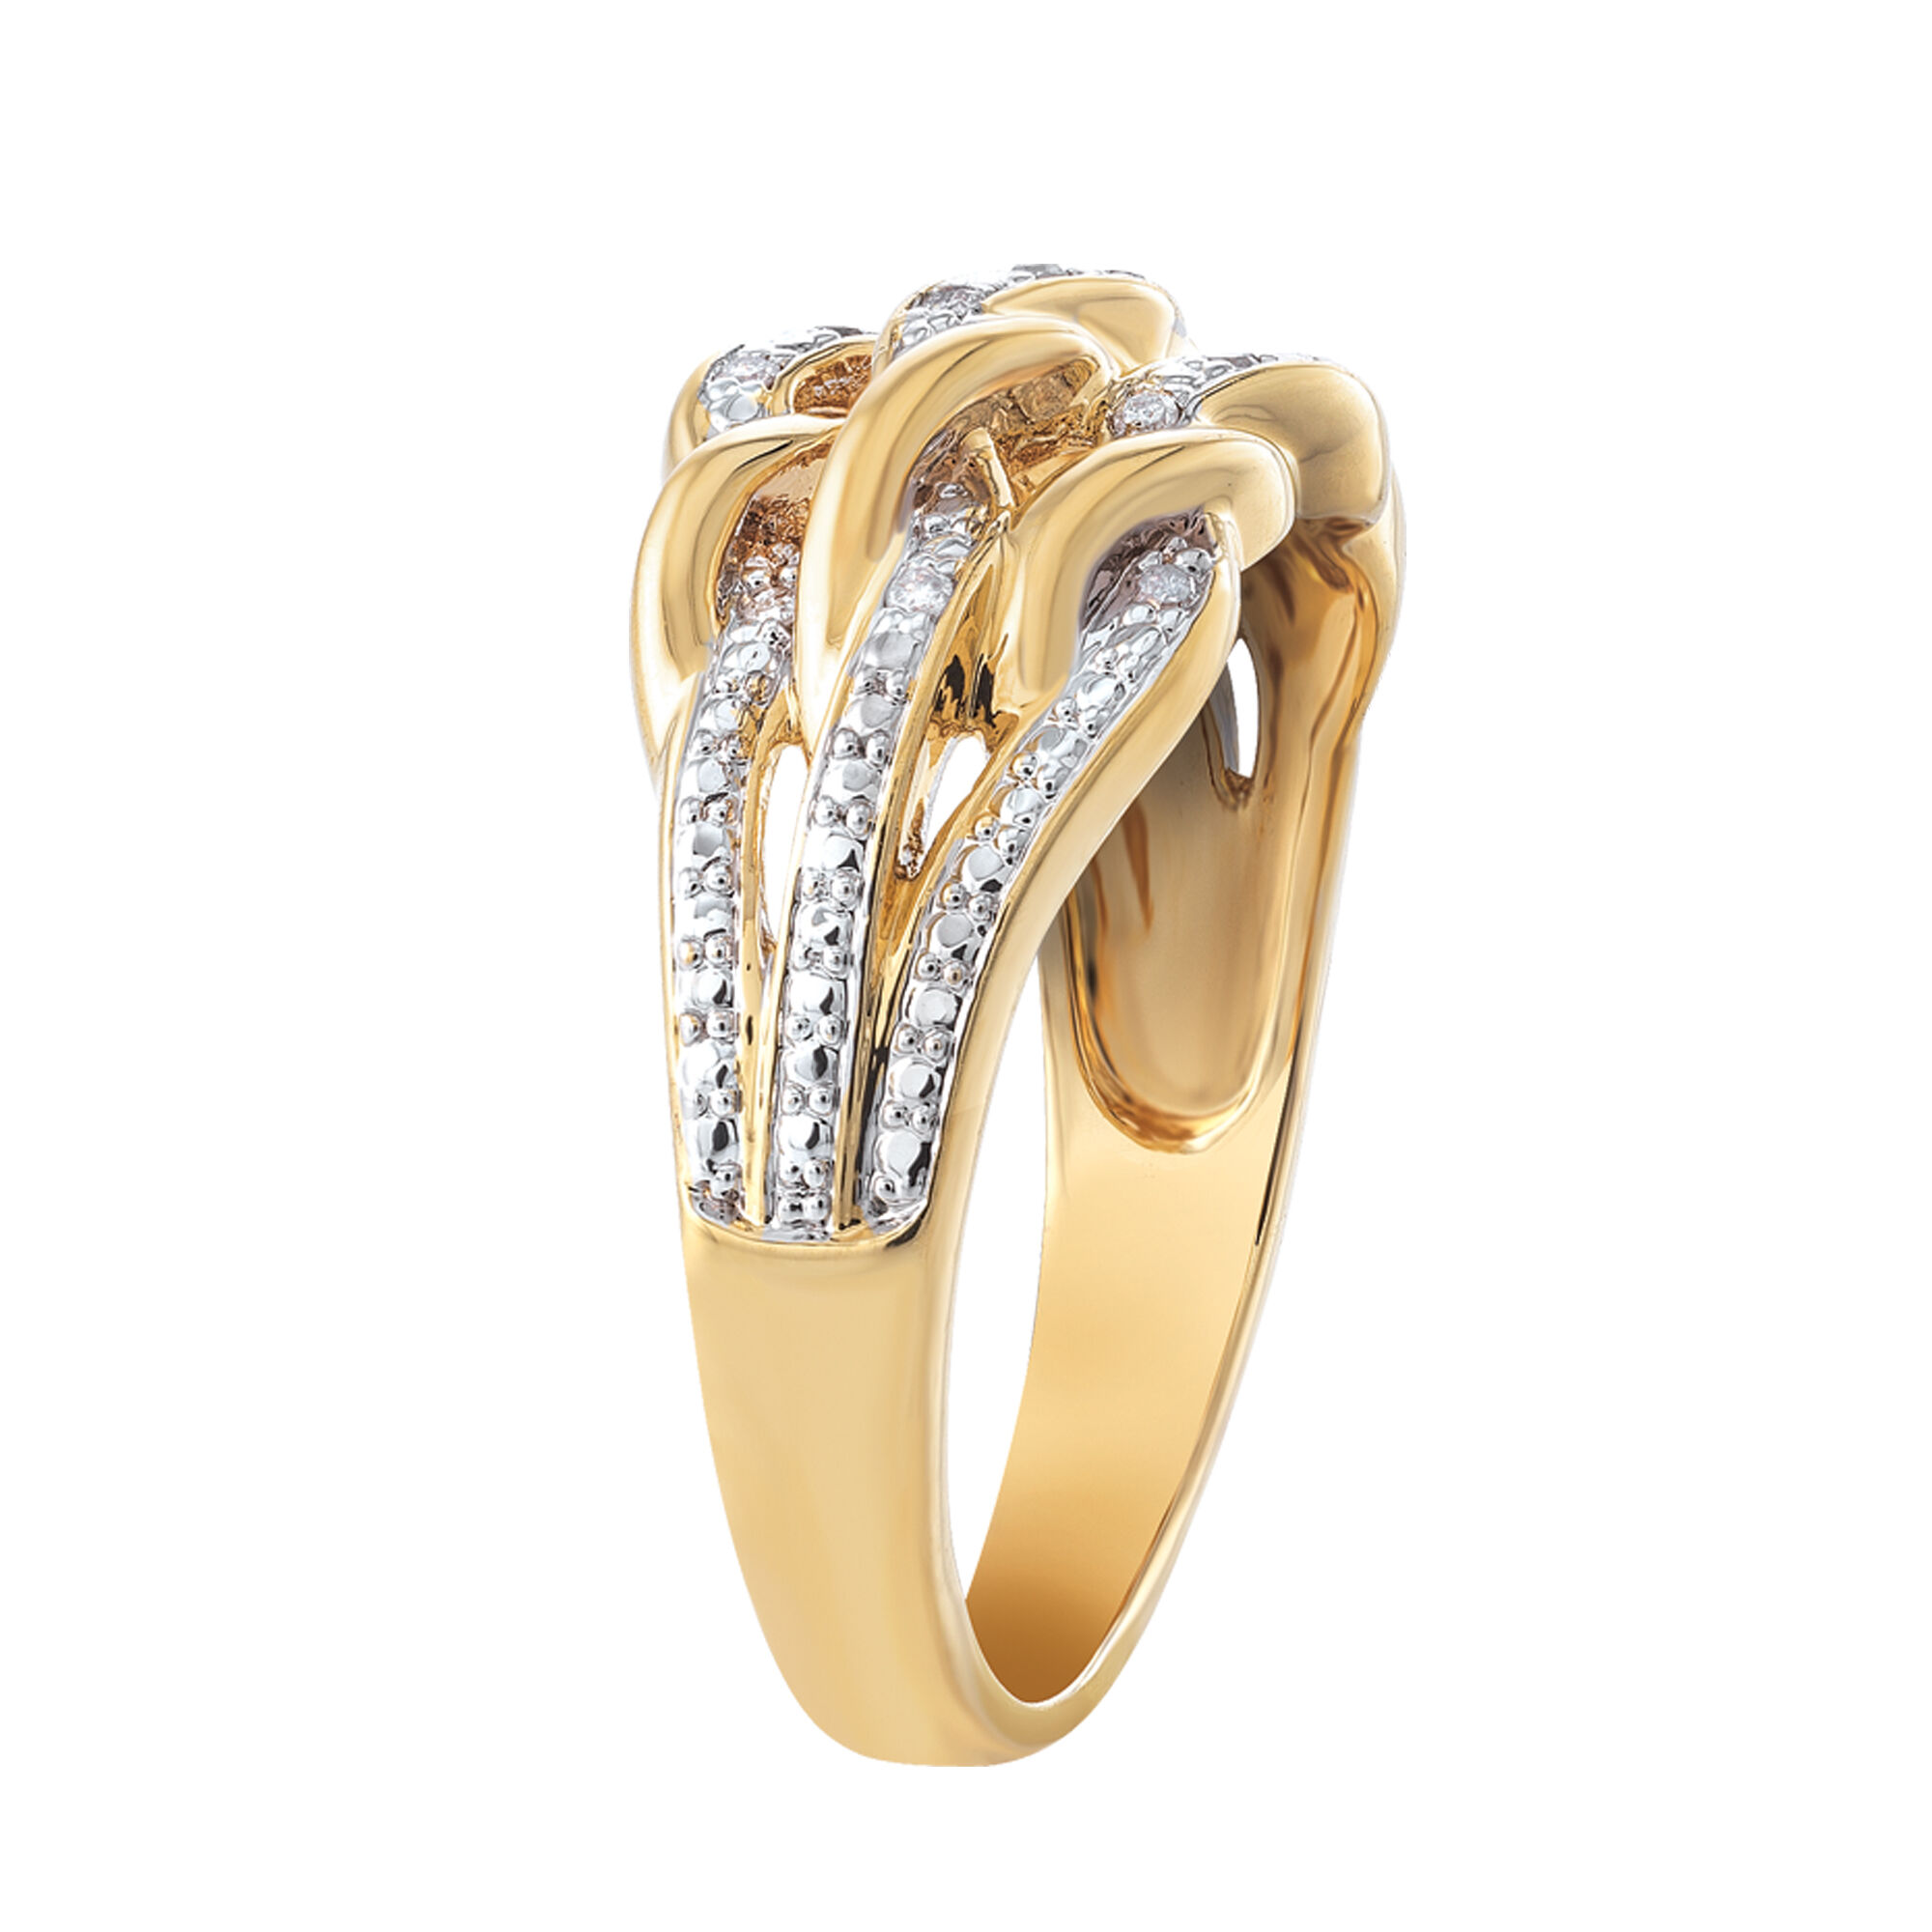 Personalized Diamond Anniversary Ring 6500 0036 b sideview